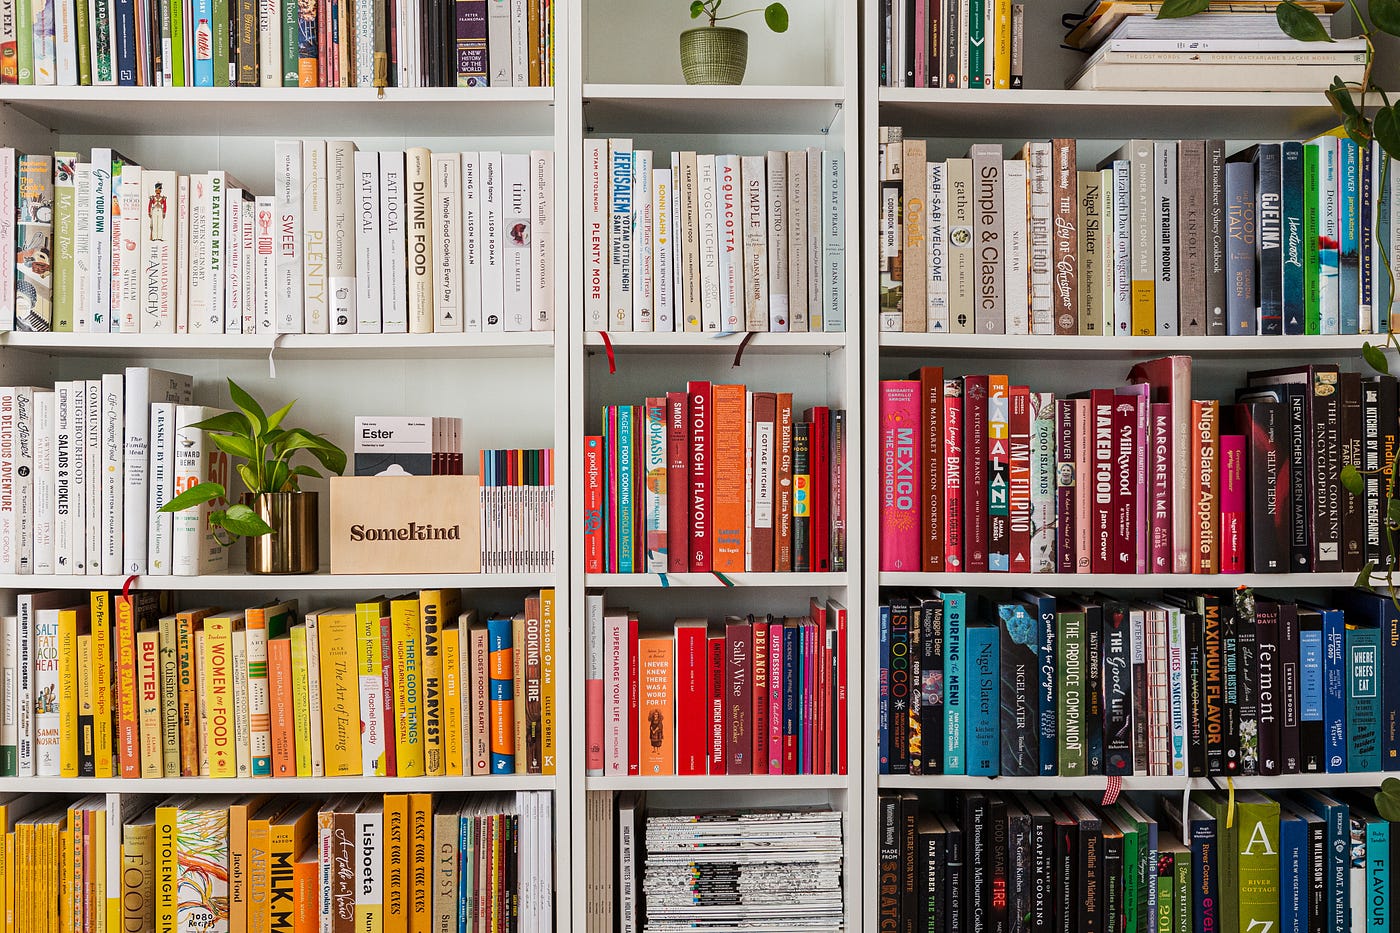 The 7 best UX Design books. Like they say 'knowledge is power